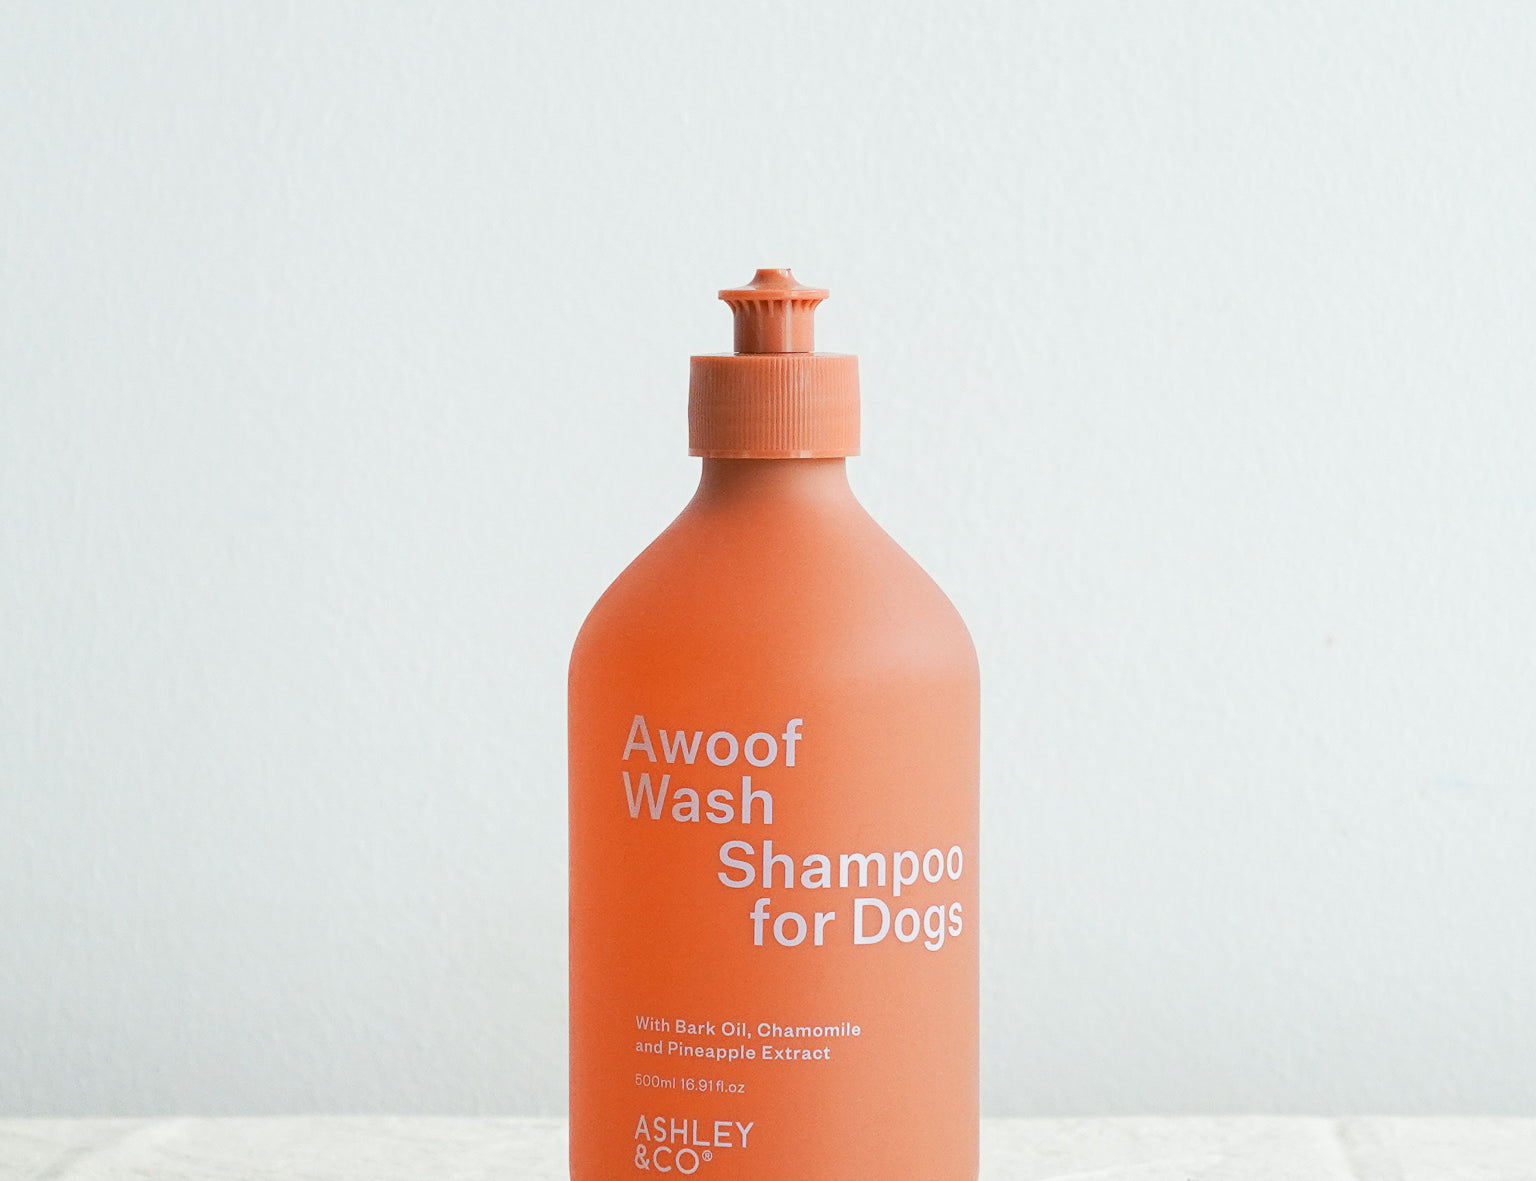 Ashley & Co Awoof Wash Shampoo for Dogs 500ml